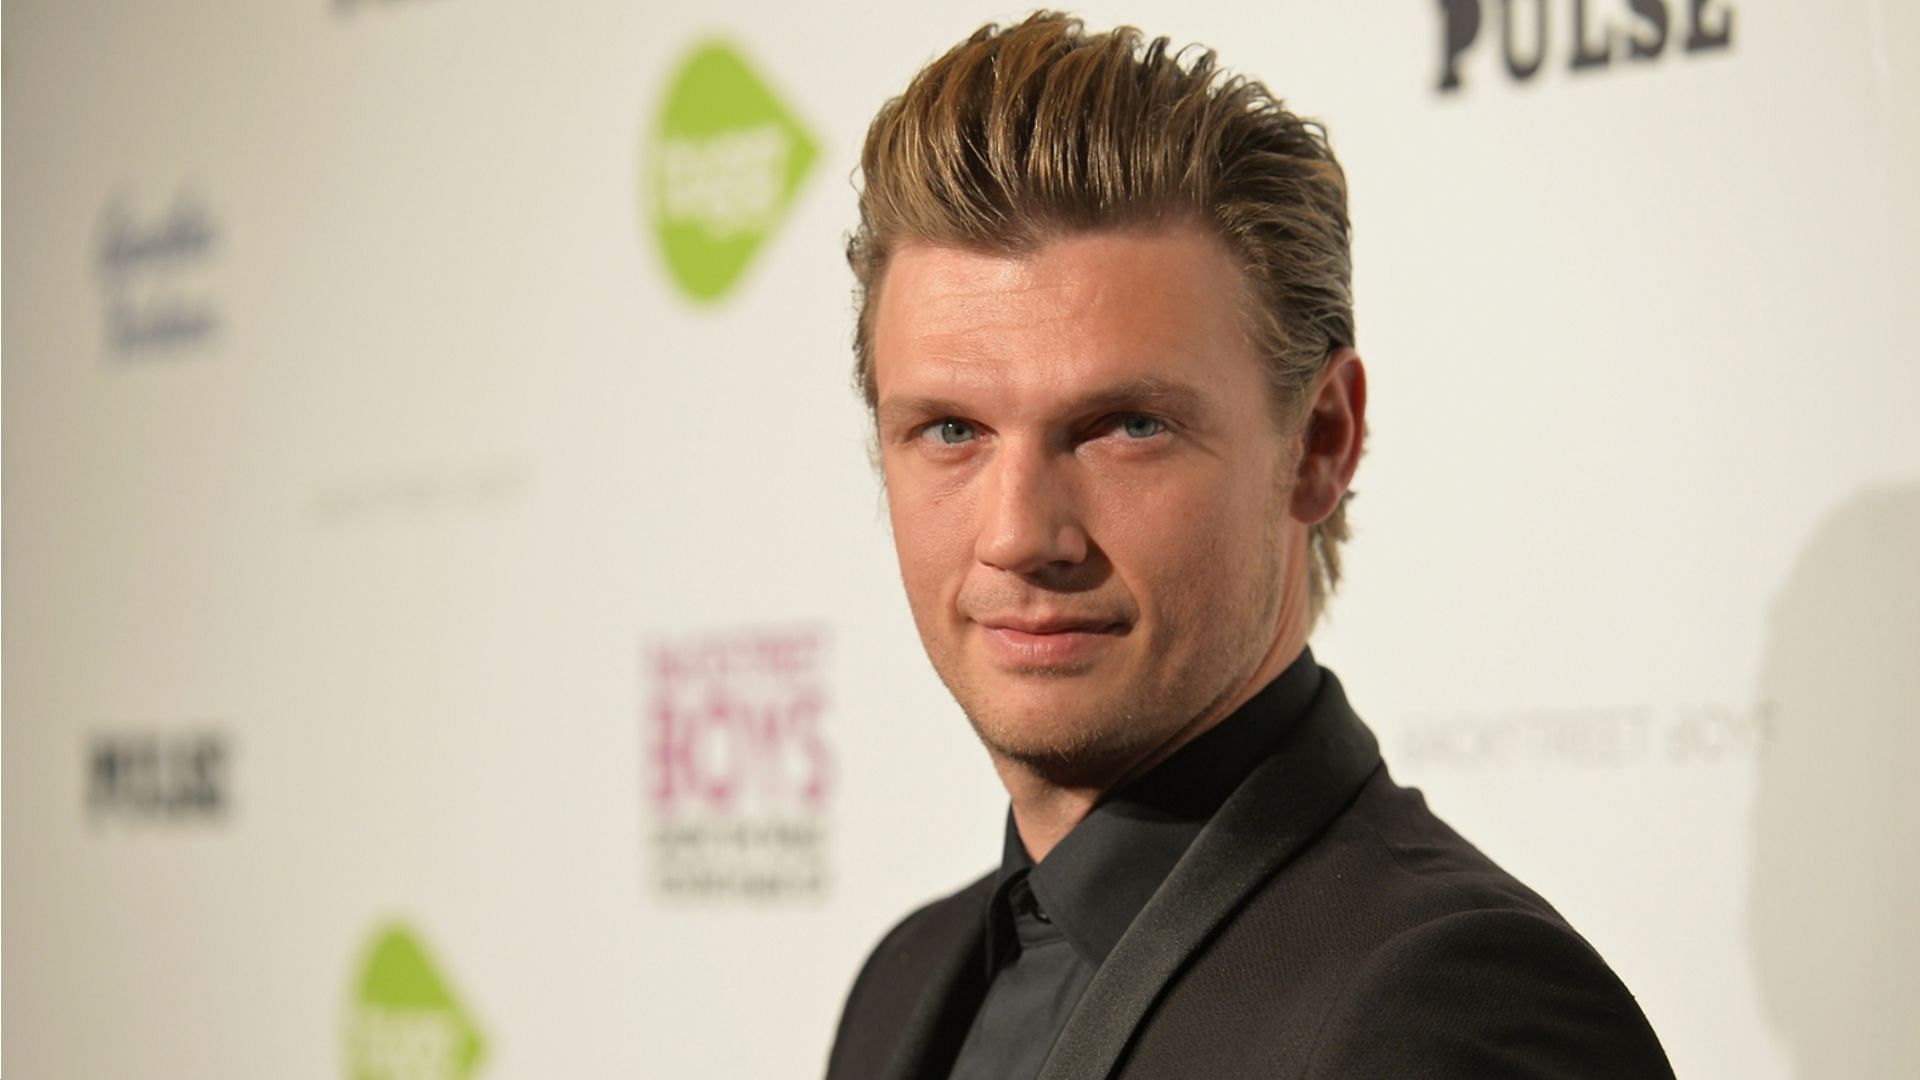 Nick Carter. (Photo via Getty Images)